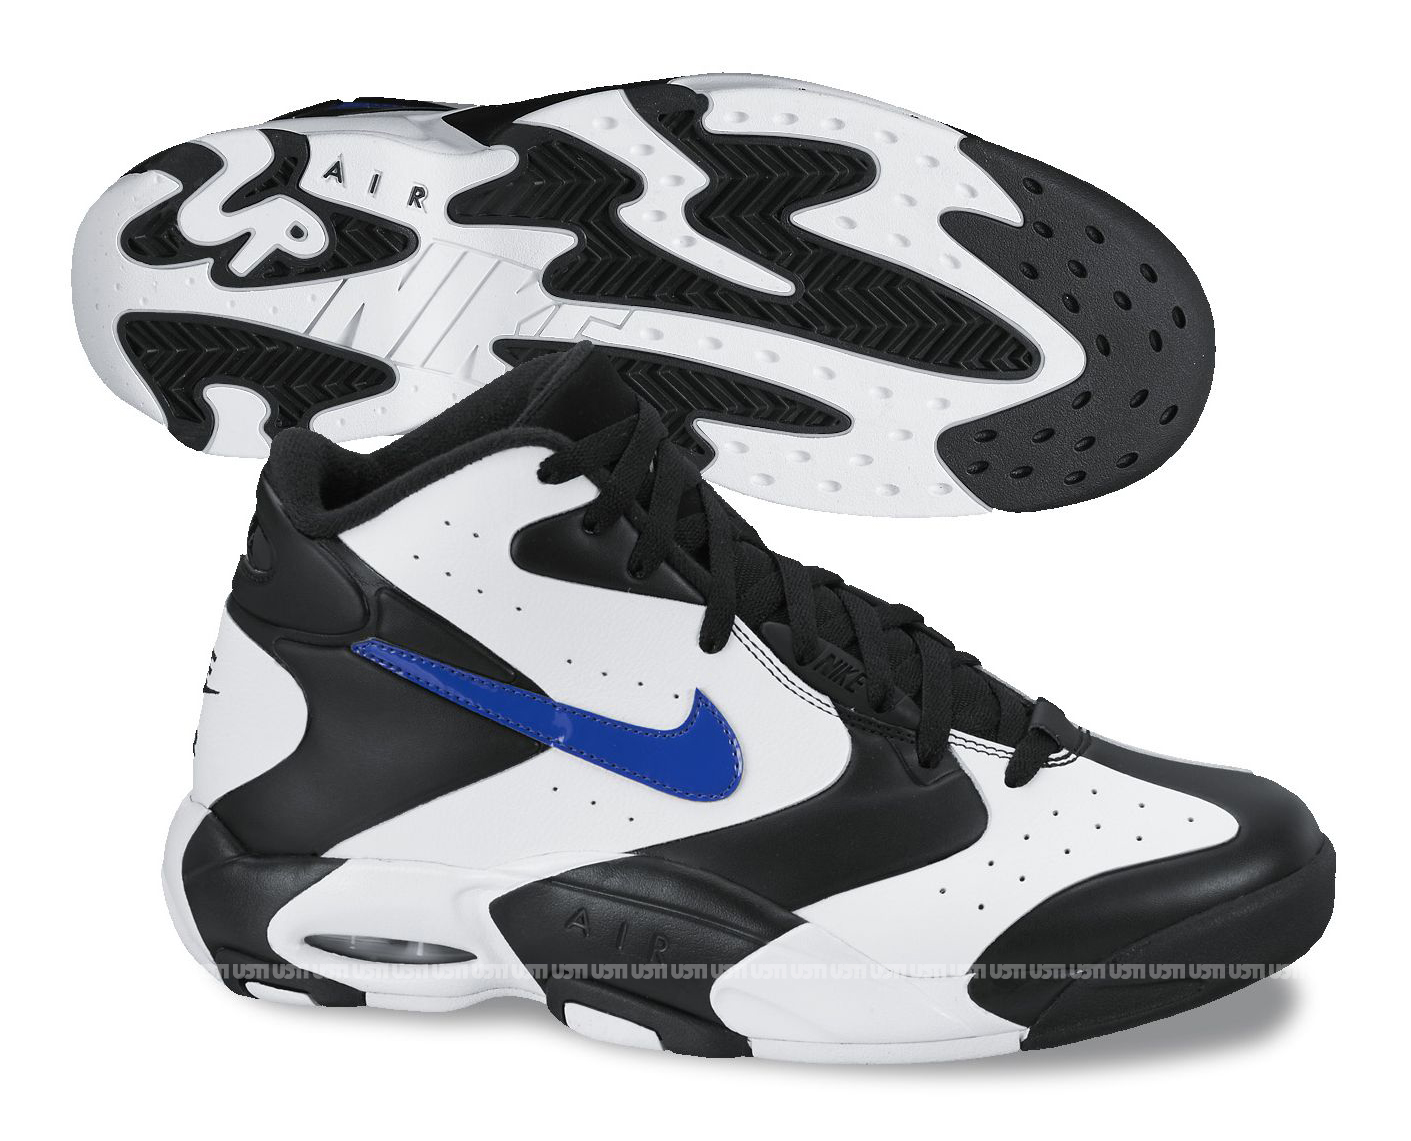 First Look // Nike Air Up '14 - Two Colorways